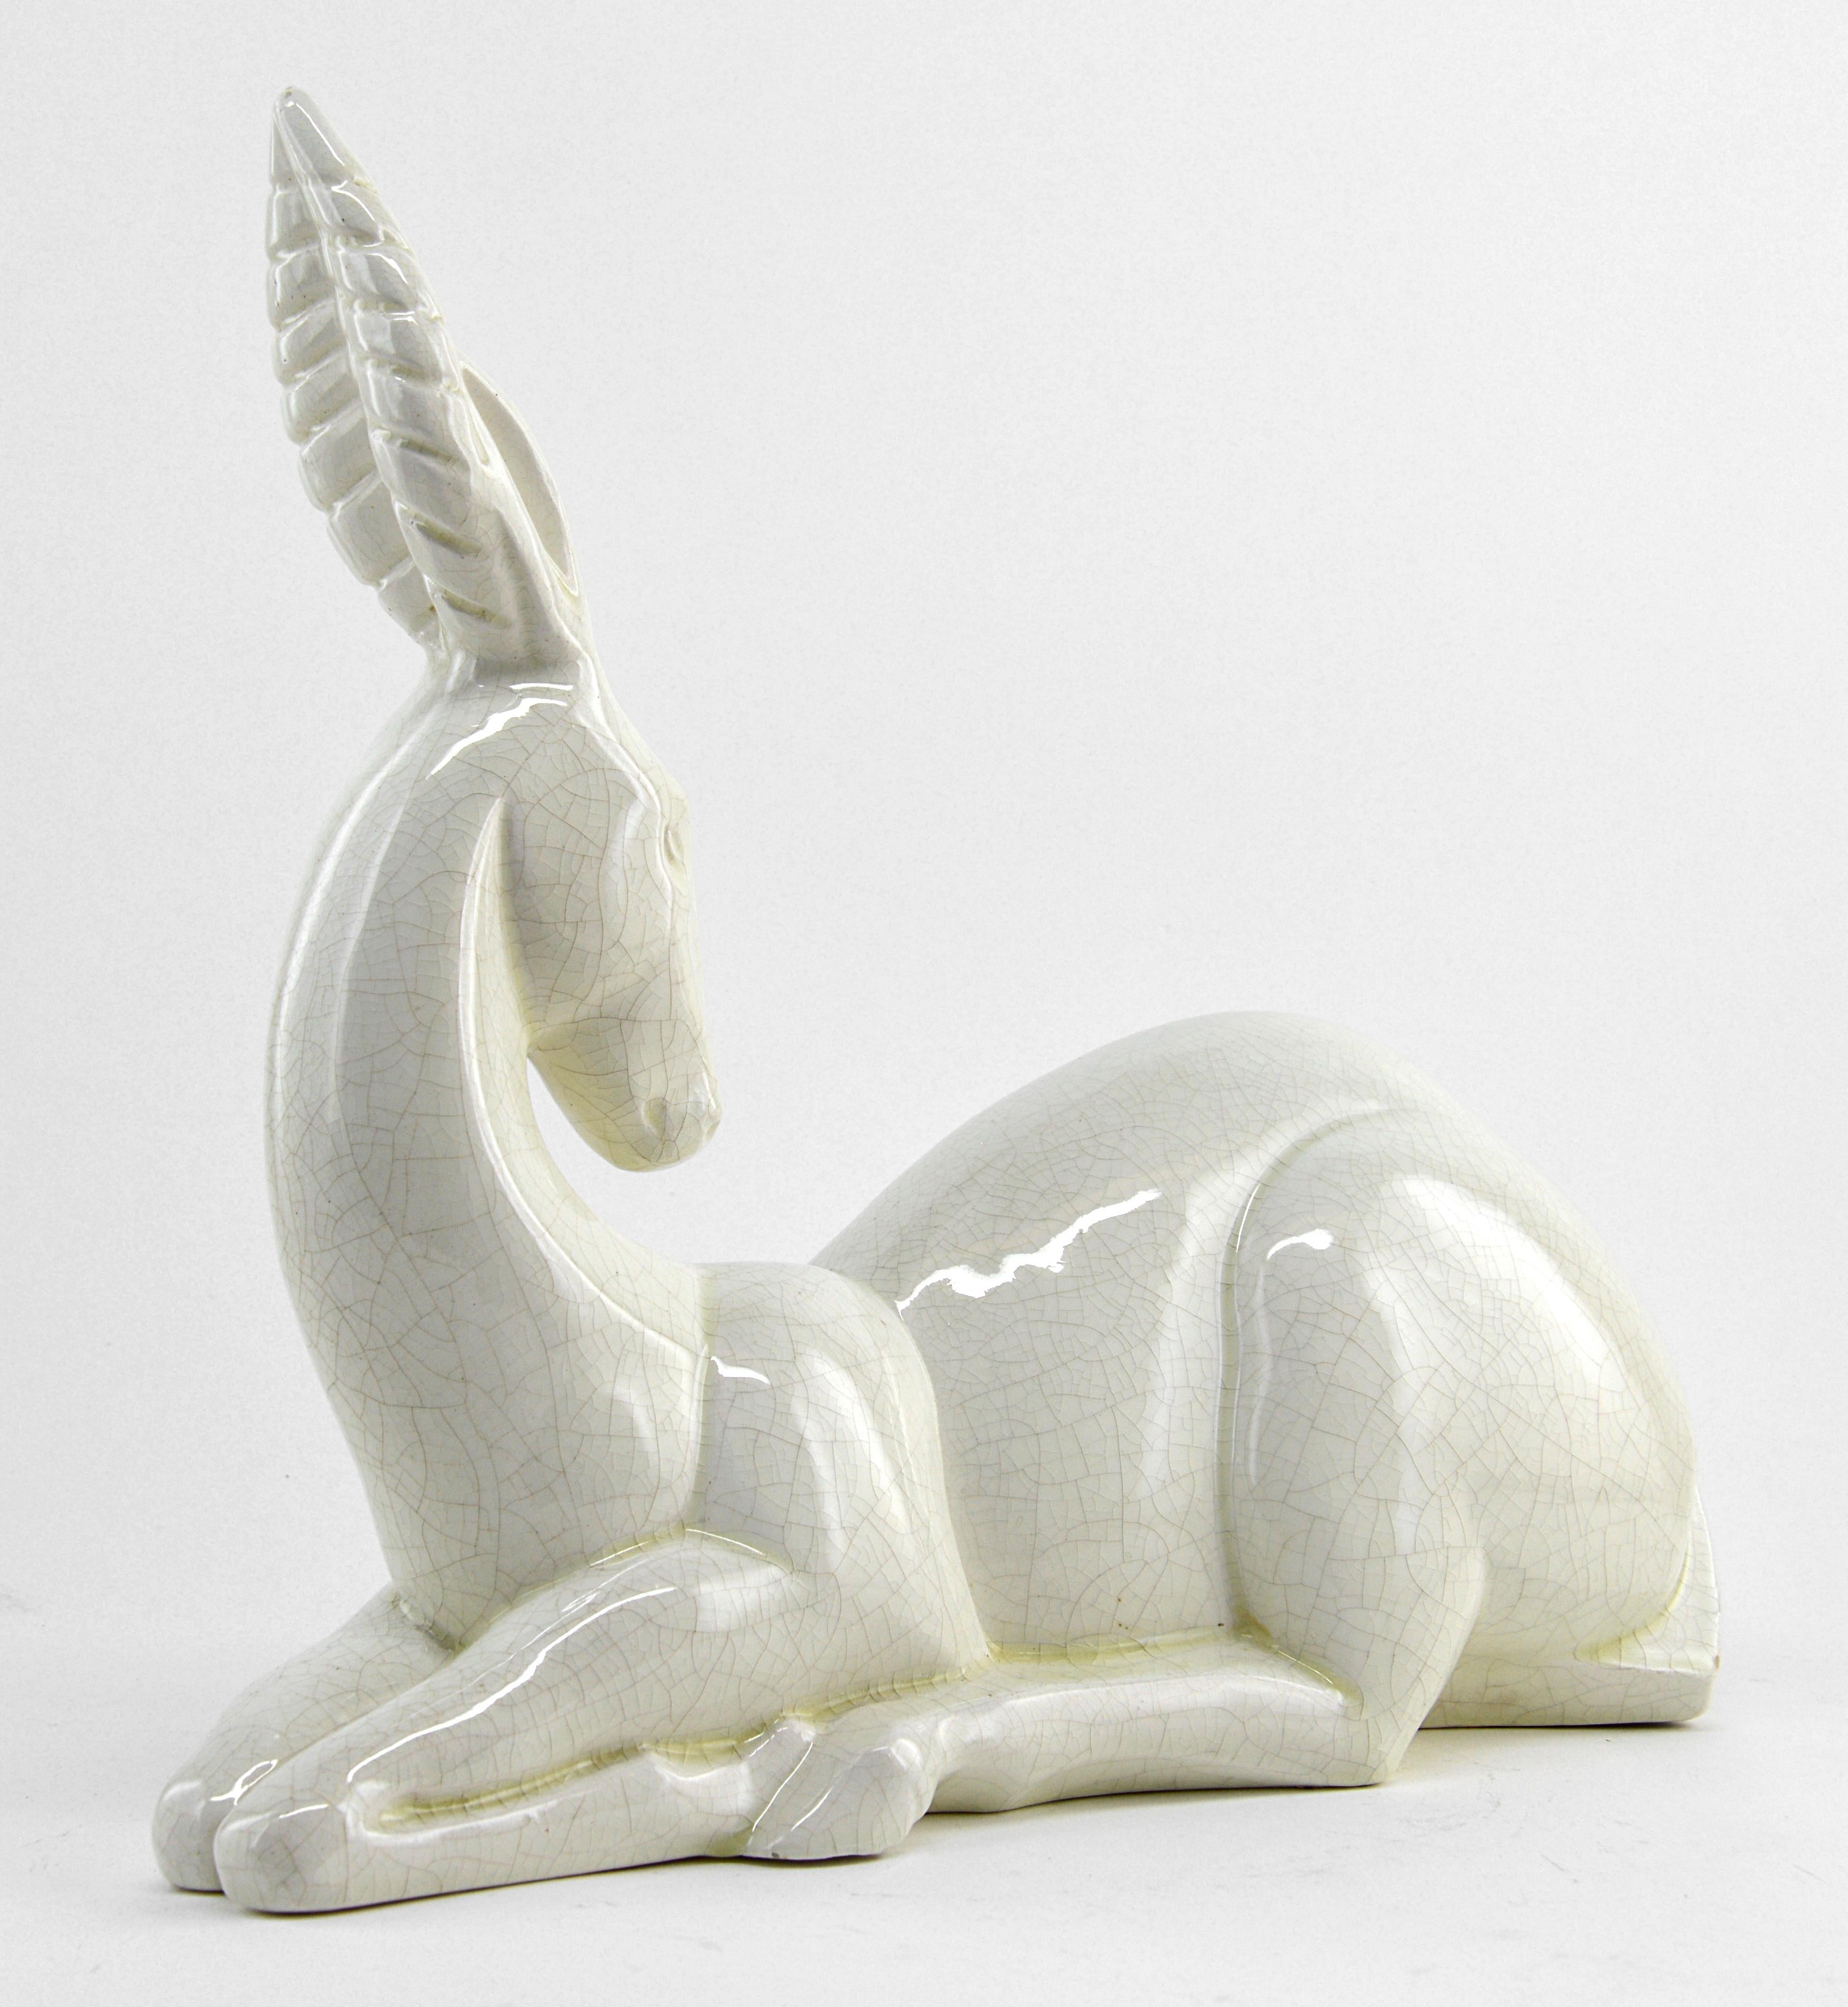 French Art Deco Gazelle (antelope) by Charles Lemanceau at Saint-Clement, France, 1930. Crackle glaze ceramic. Sold by Les Galeries Lafayette, number #7 on the 1930 Saint-Clement catalog. Illustrated in 